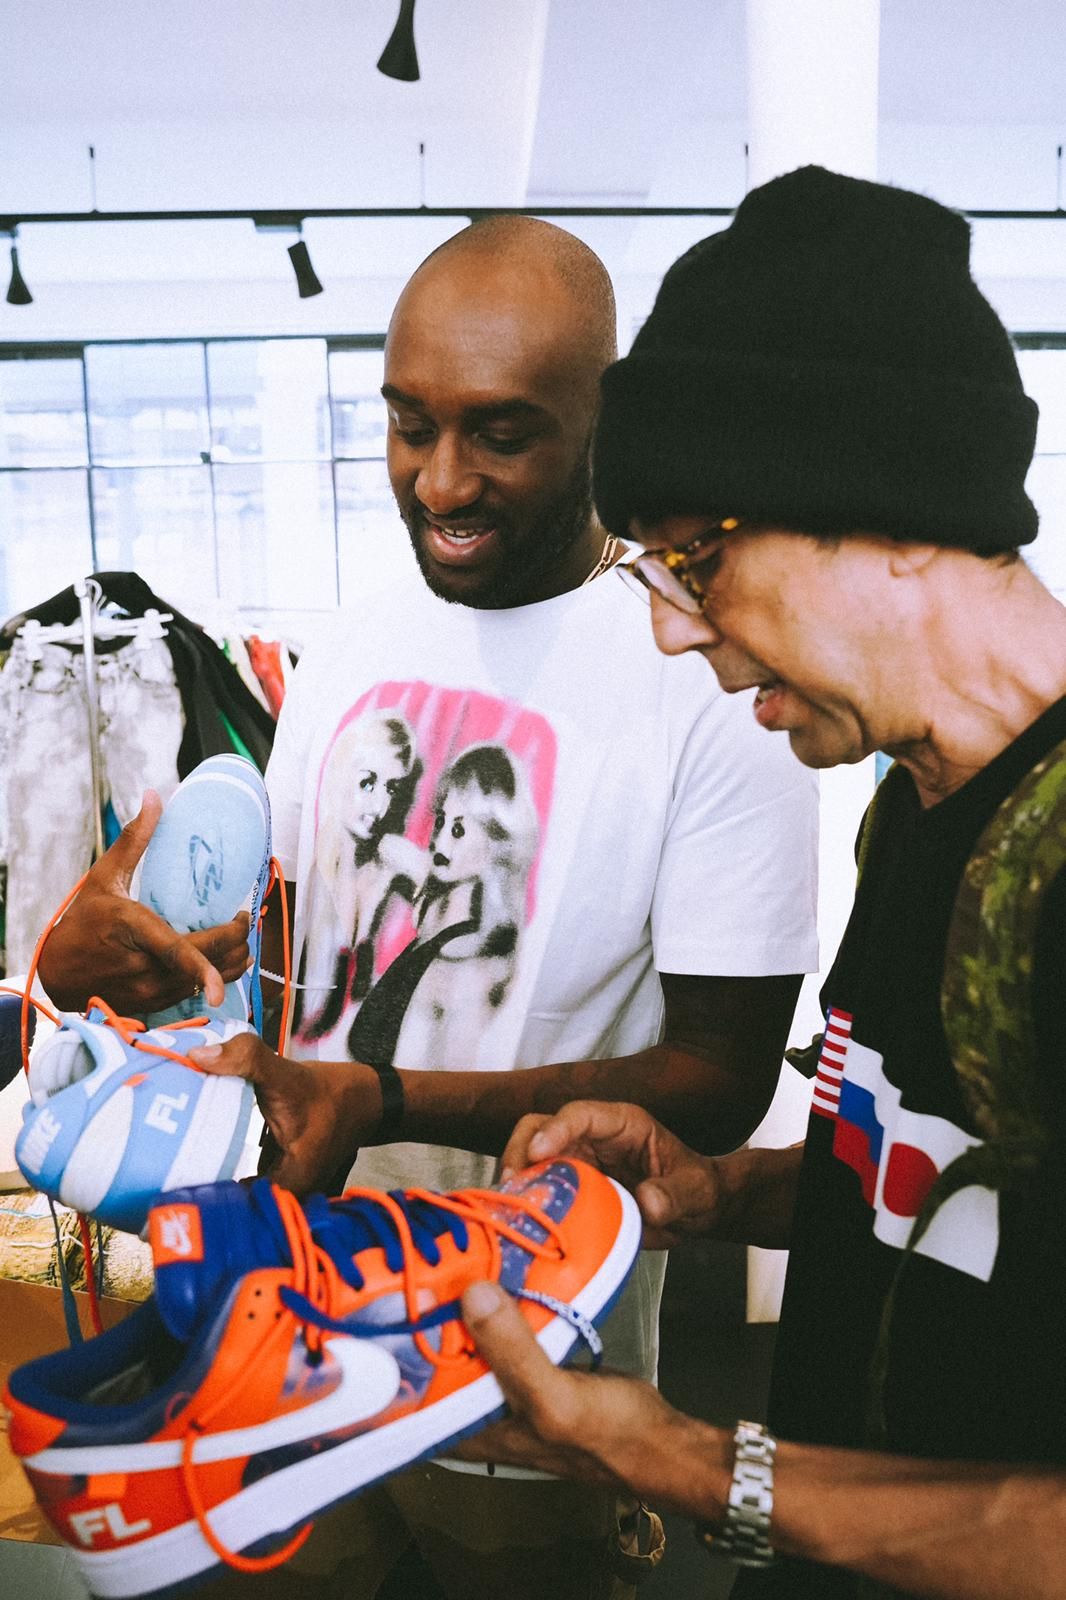 Sneakerheads Smashed Expectations at an Auction of Designs by Virgil Abloh  and Futura, With a Single Pair Netting Over $100,000